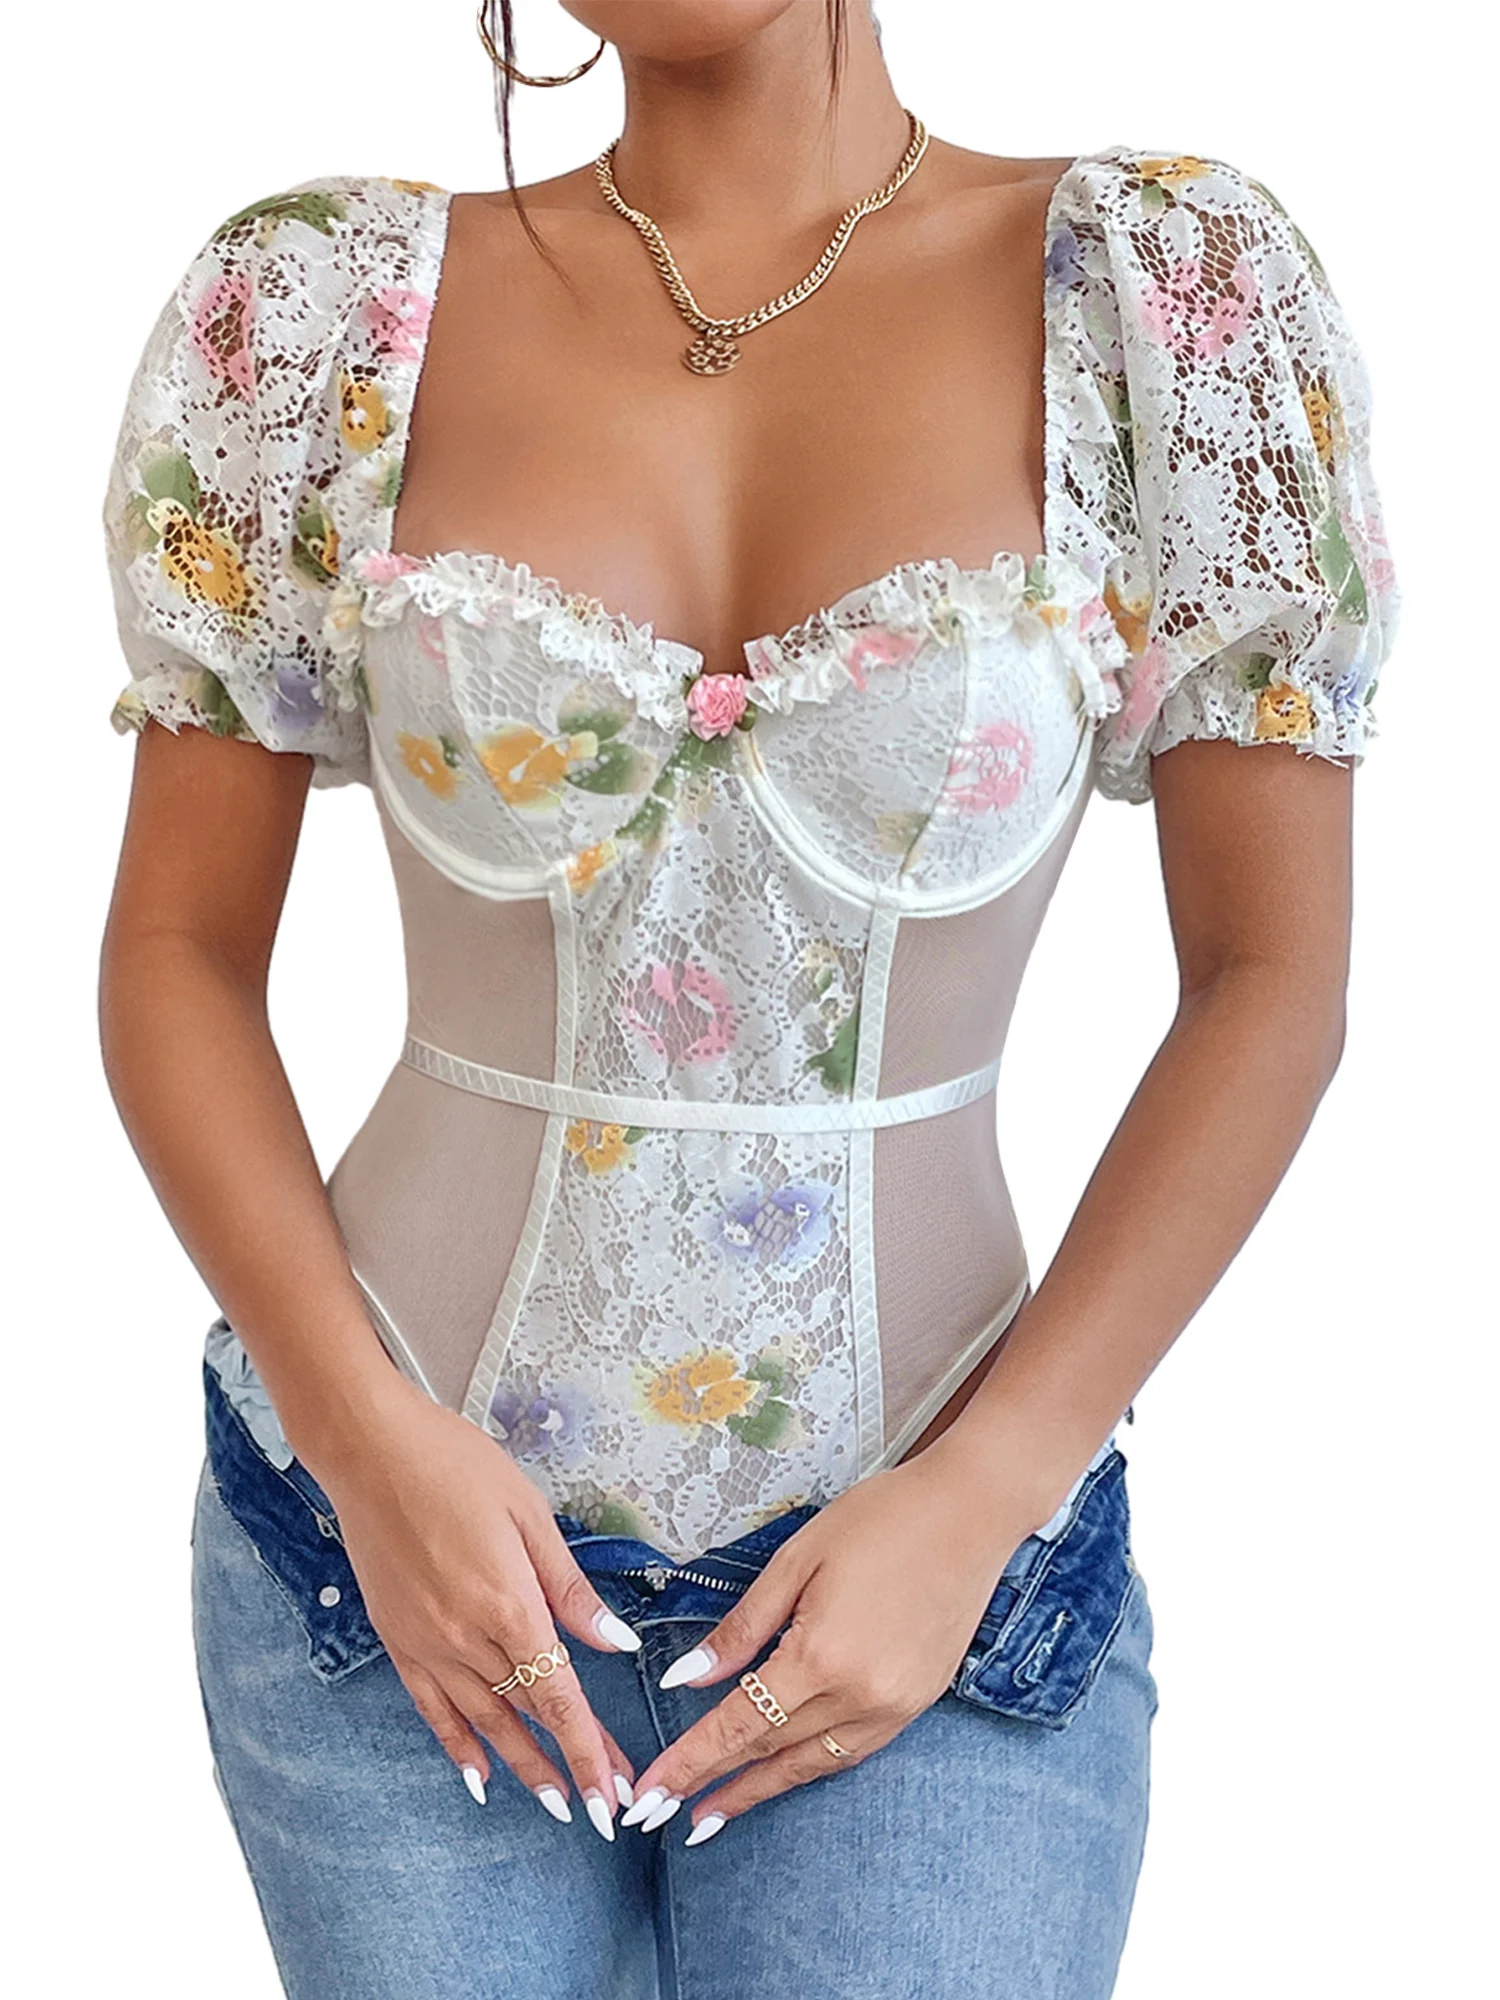 

Women s Sheer Lace Bodysuit with Short Puff Sleeves Mesh Patchwork Floral Print and Corset Detail - Stylish Leotard Playsuit